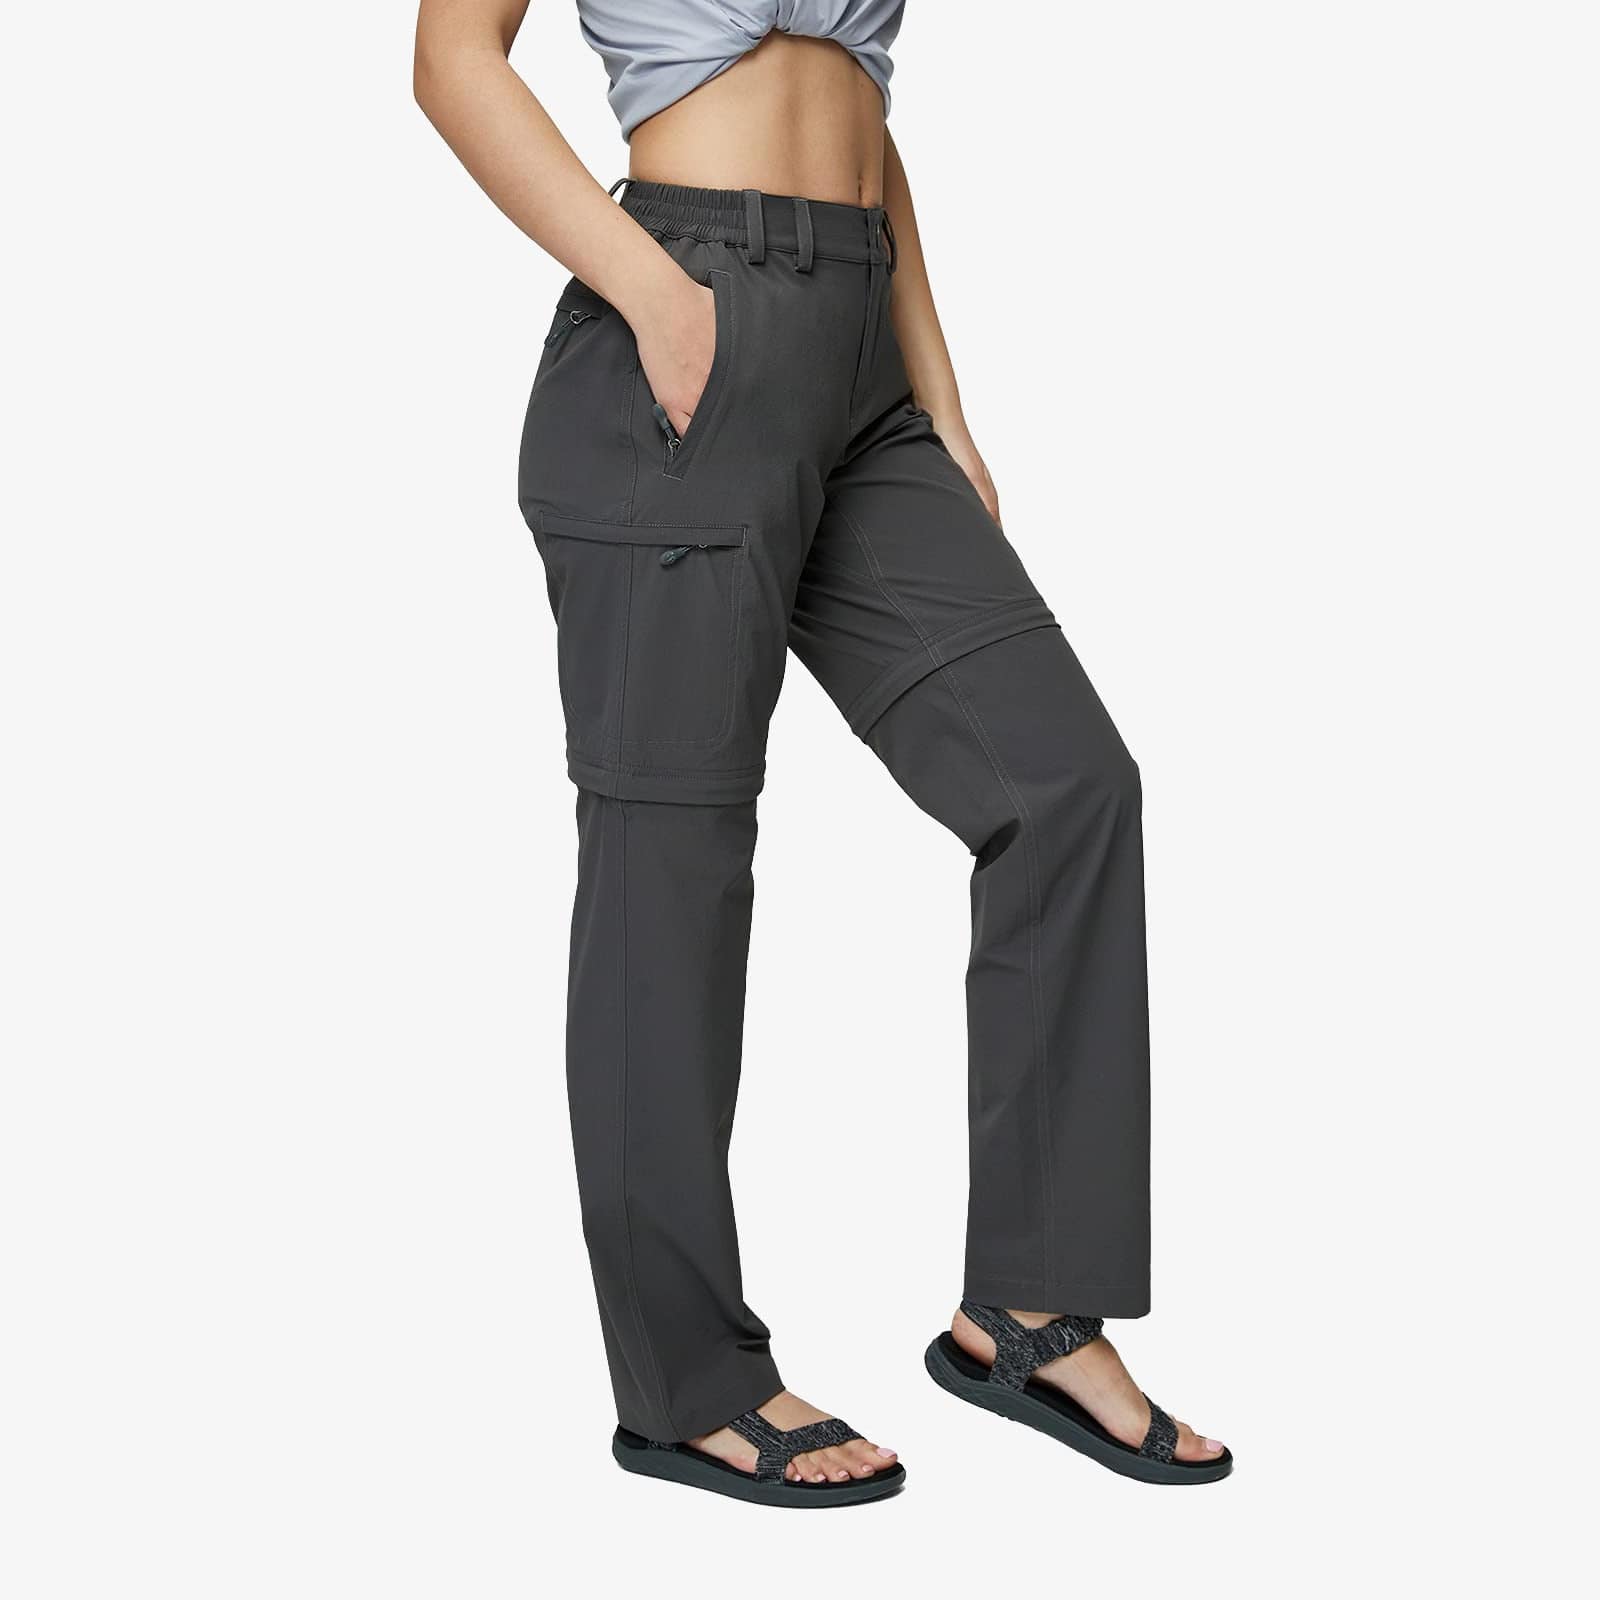 Mier Women's Convertible Hiking Pants Lightweight Stretch Cargo Pants, Graphite Grey / 2